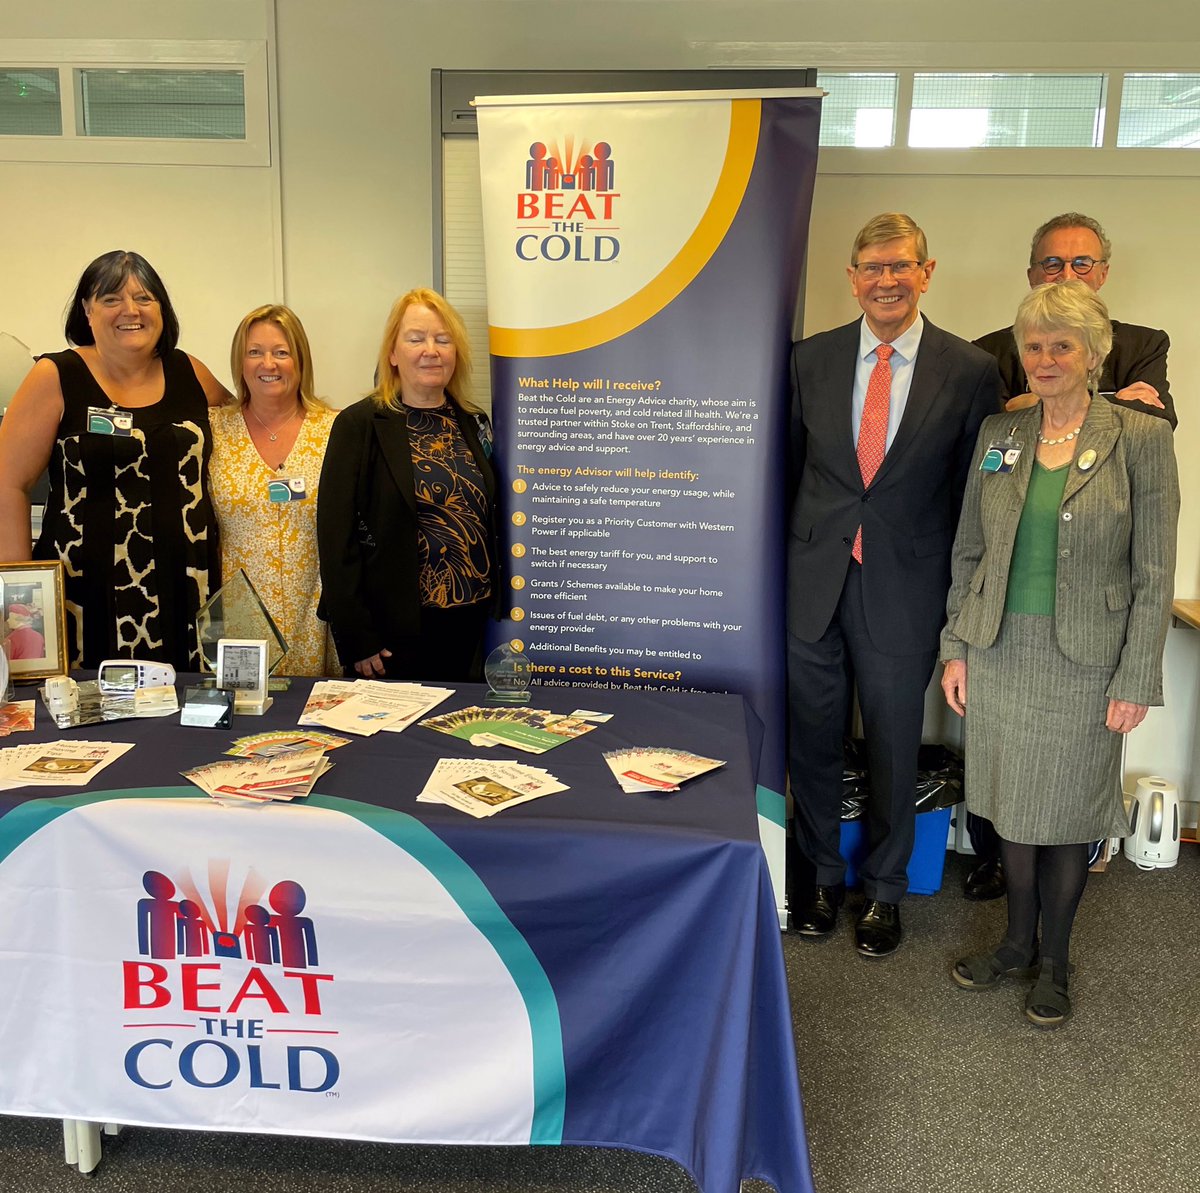 Pleased to learn more about this amazing charity bestcold.org.uk Helping to offset the adverse health effects of the cold and alleviate some of the fuel poverty experienced so many households across the whole of Staffordshire. Thank you for all your vital help.